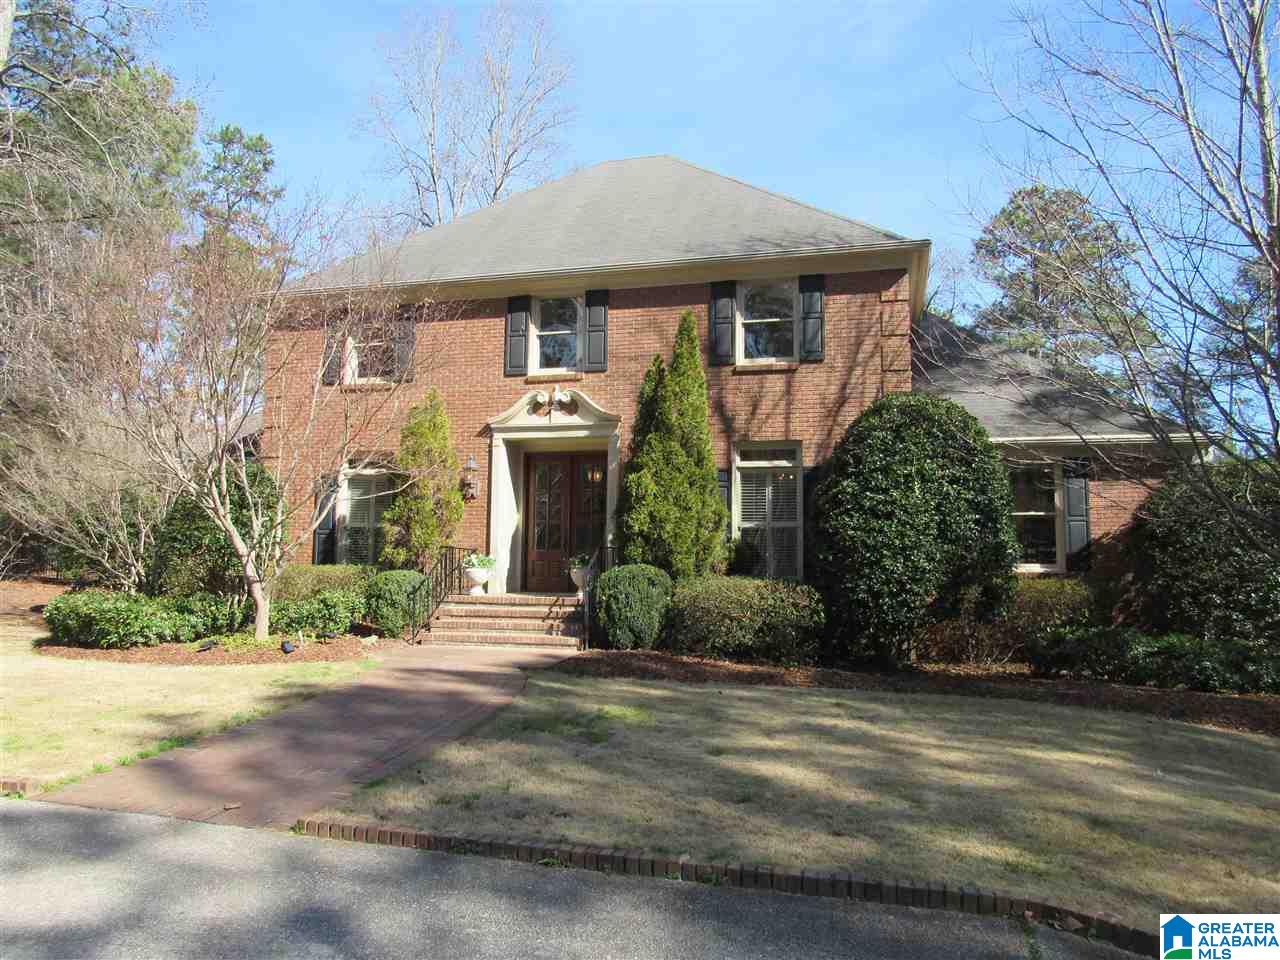 873501 1 Open Houses for Feb. 7-9 from McCalla to Odenville and in between